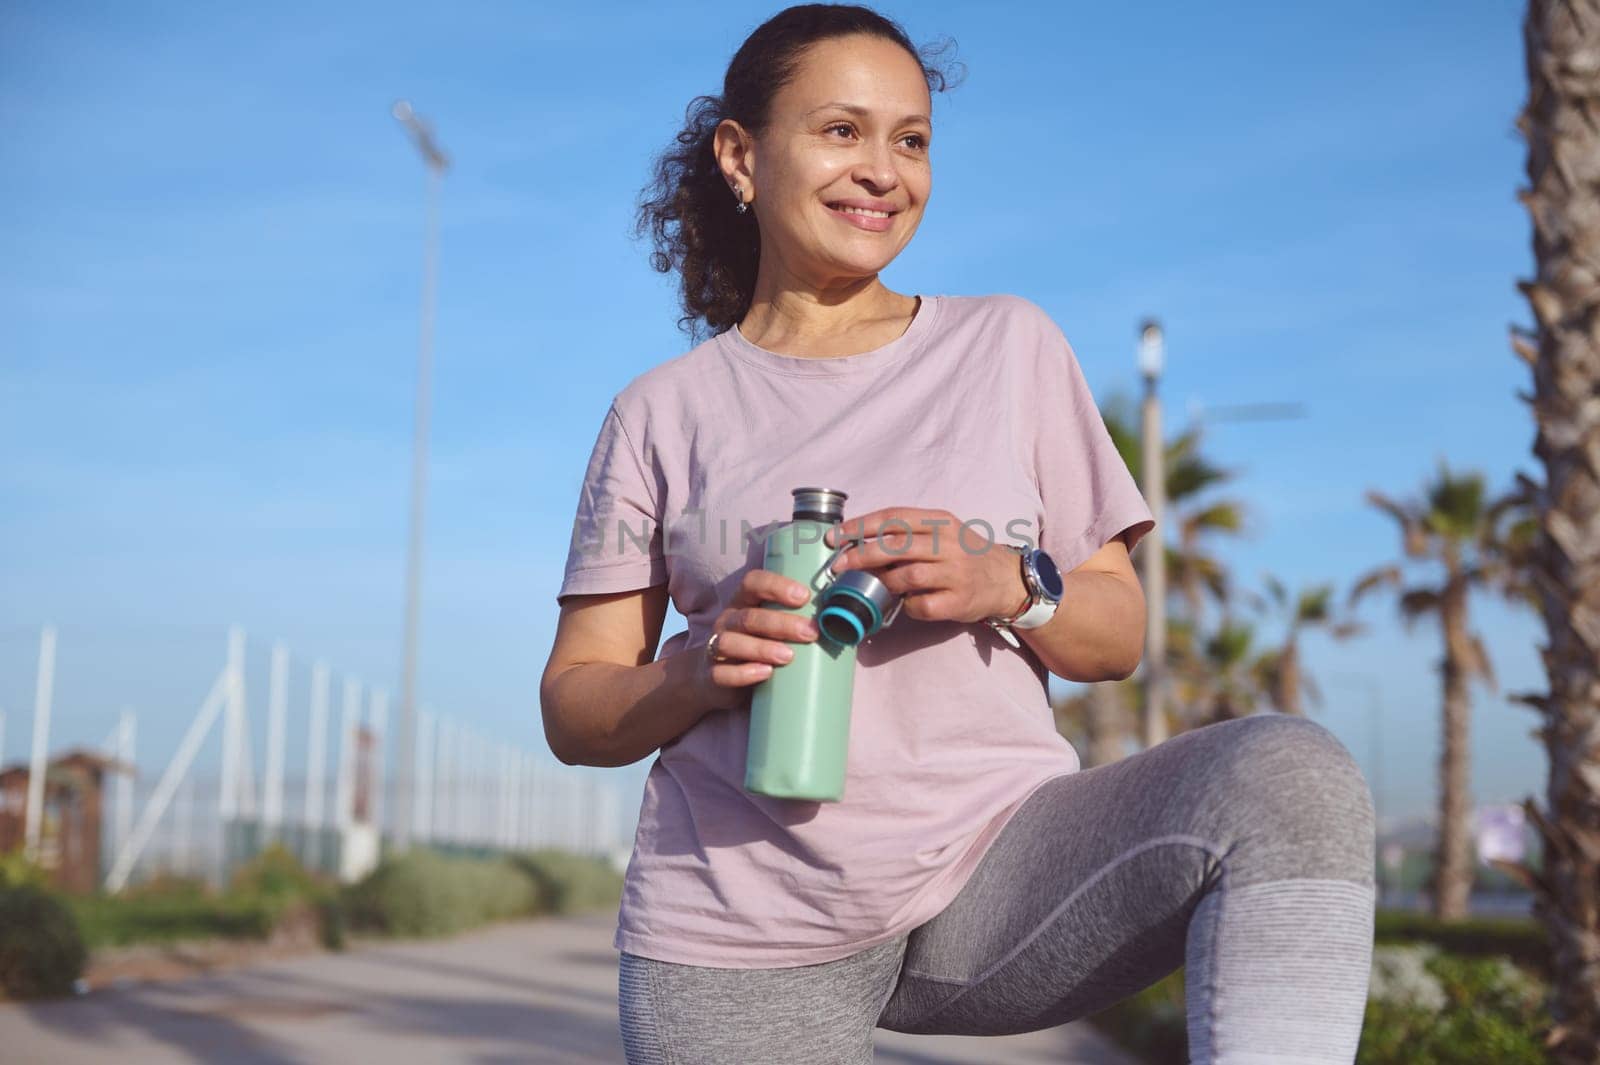 Smiling happy female athlete, determined sportswoman drinking water after playing sports on the beach by artgf